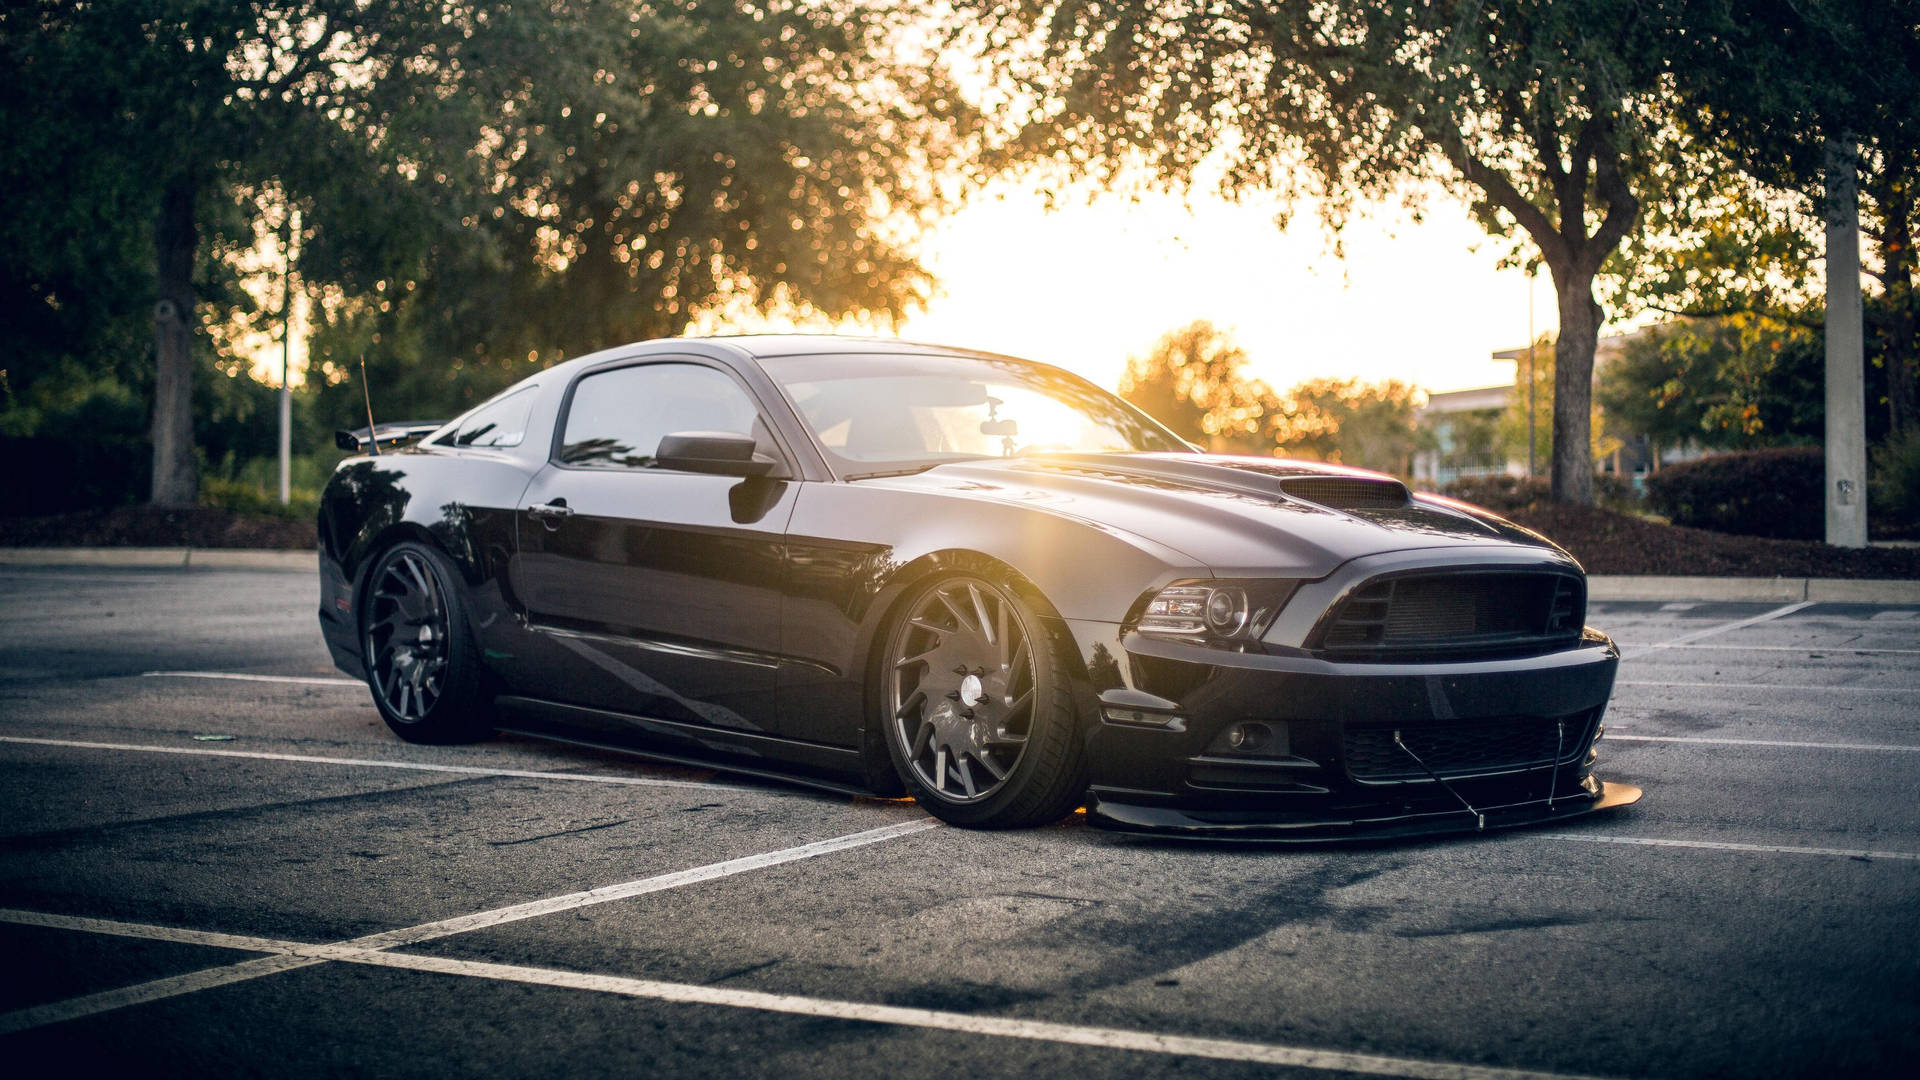 Black Ford Mustang Shelby Wallpaper